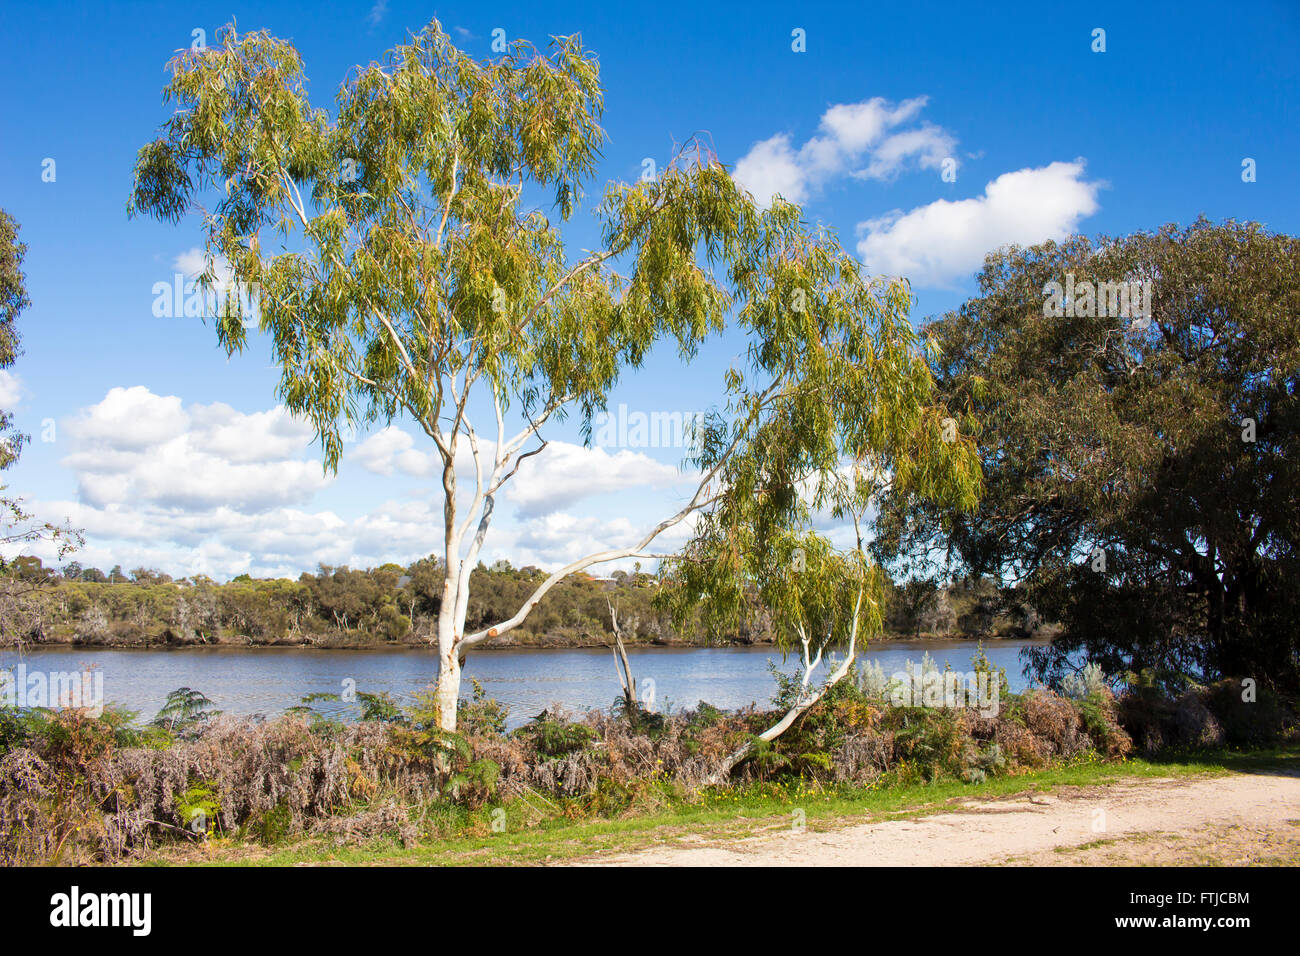 Eucalypt trees  growing along the banks of the Collie River, near Australind , South Western Australia  on a sunny day in winter Stock Photo